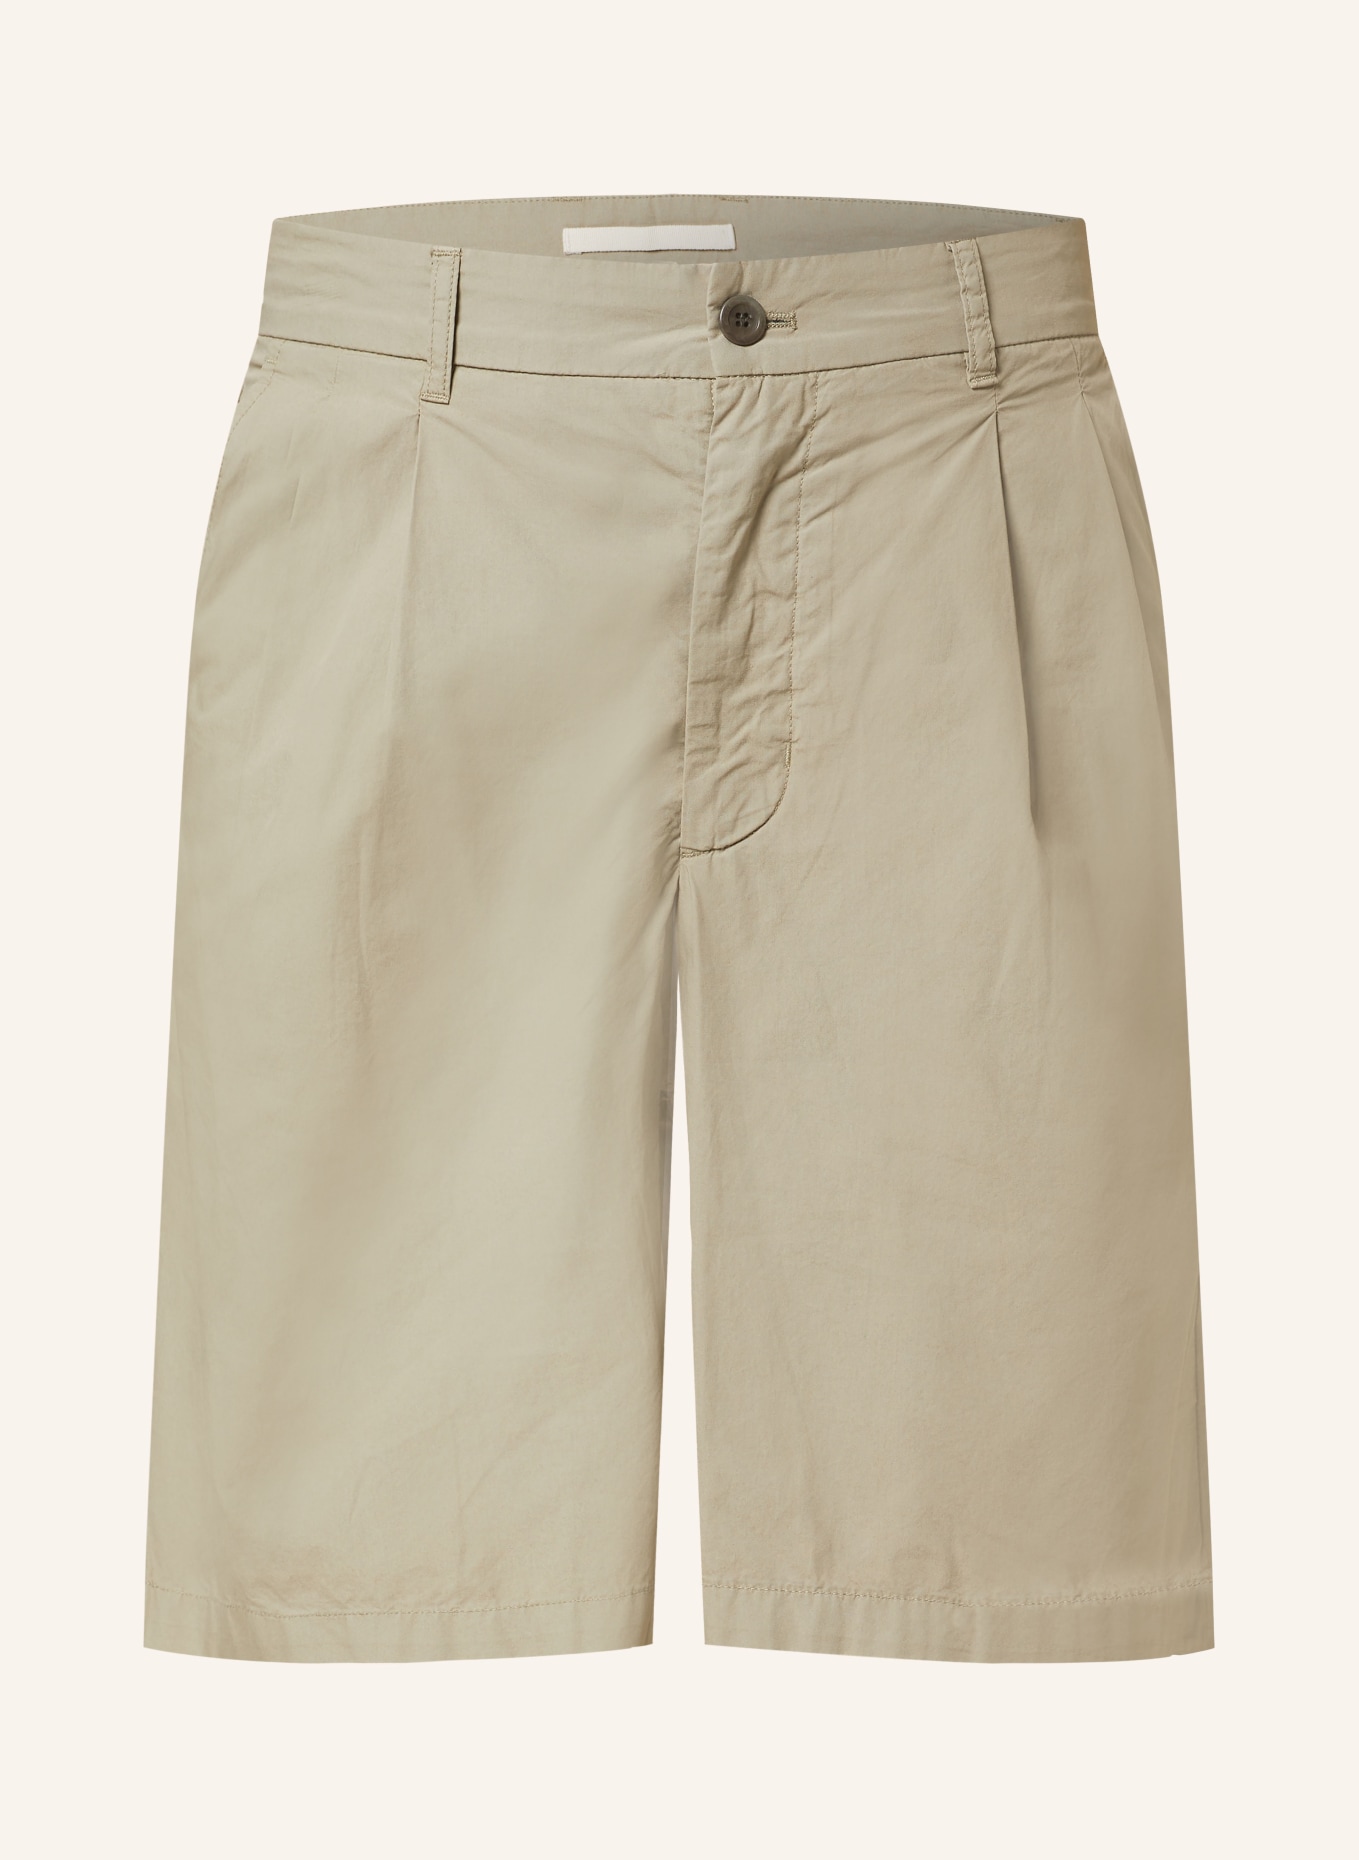 NORSE PROJECTS Shorts BENN Relaxed Fit, Farbe: KHAKI (Bild 1)